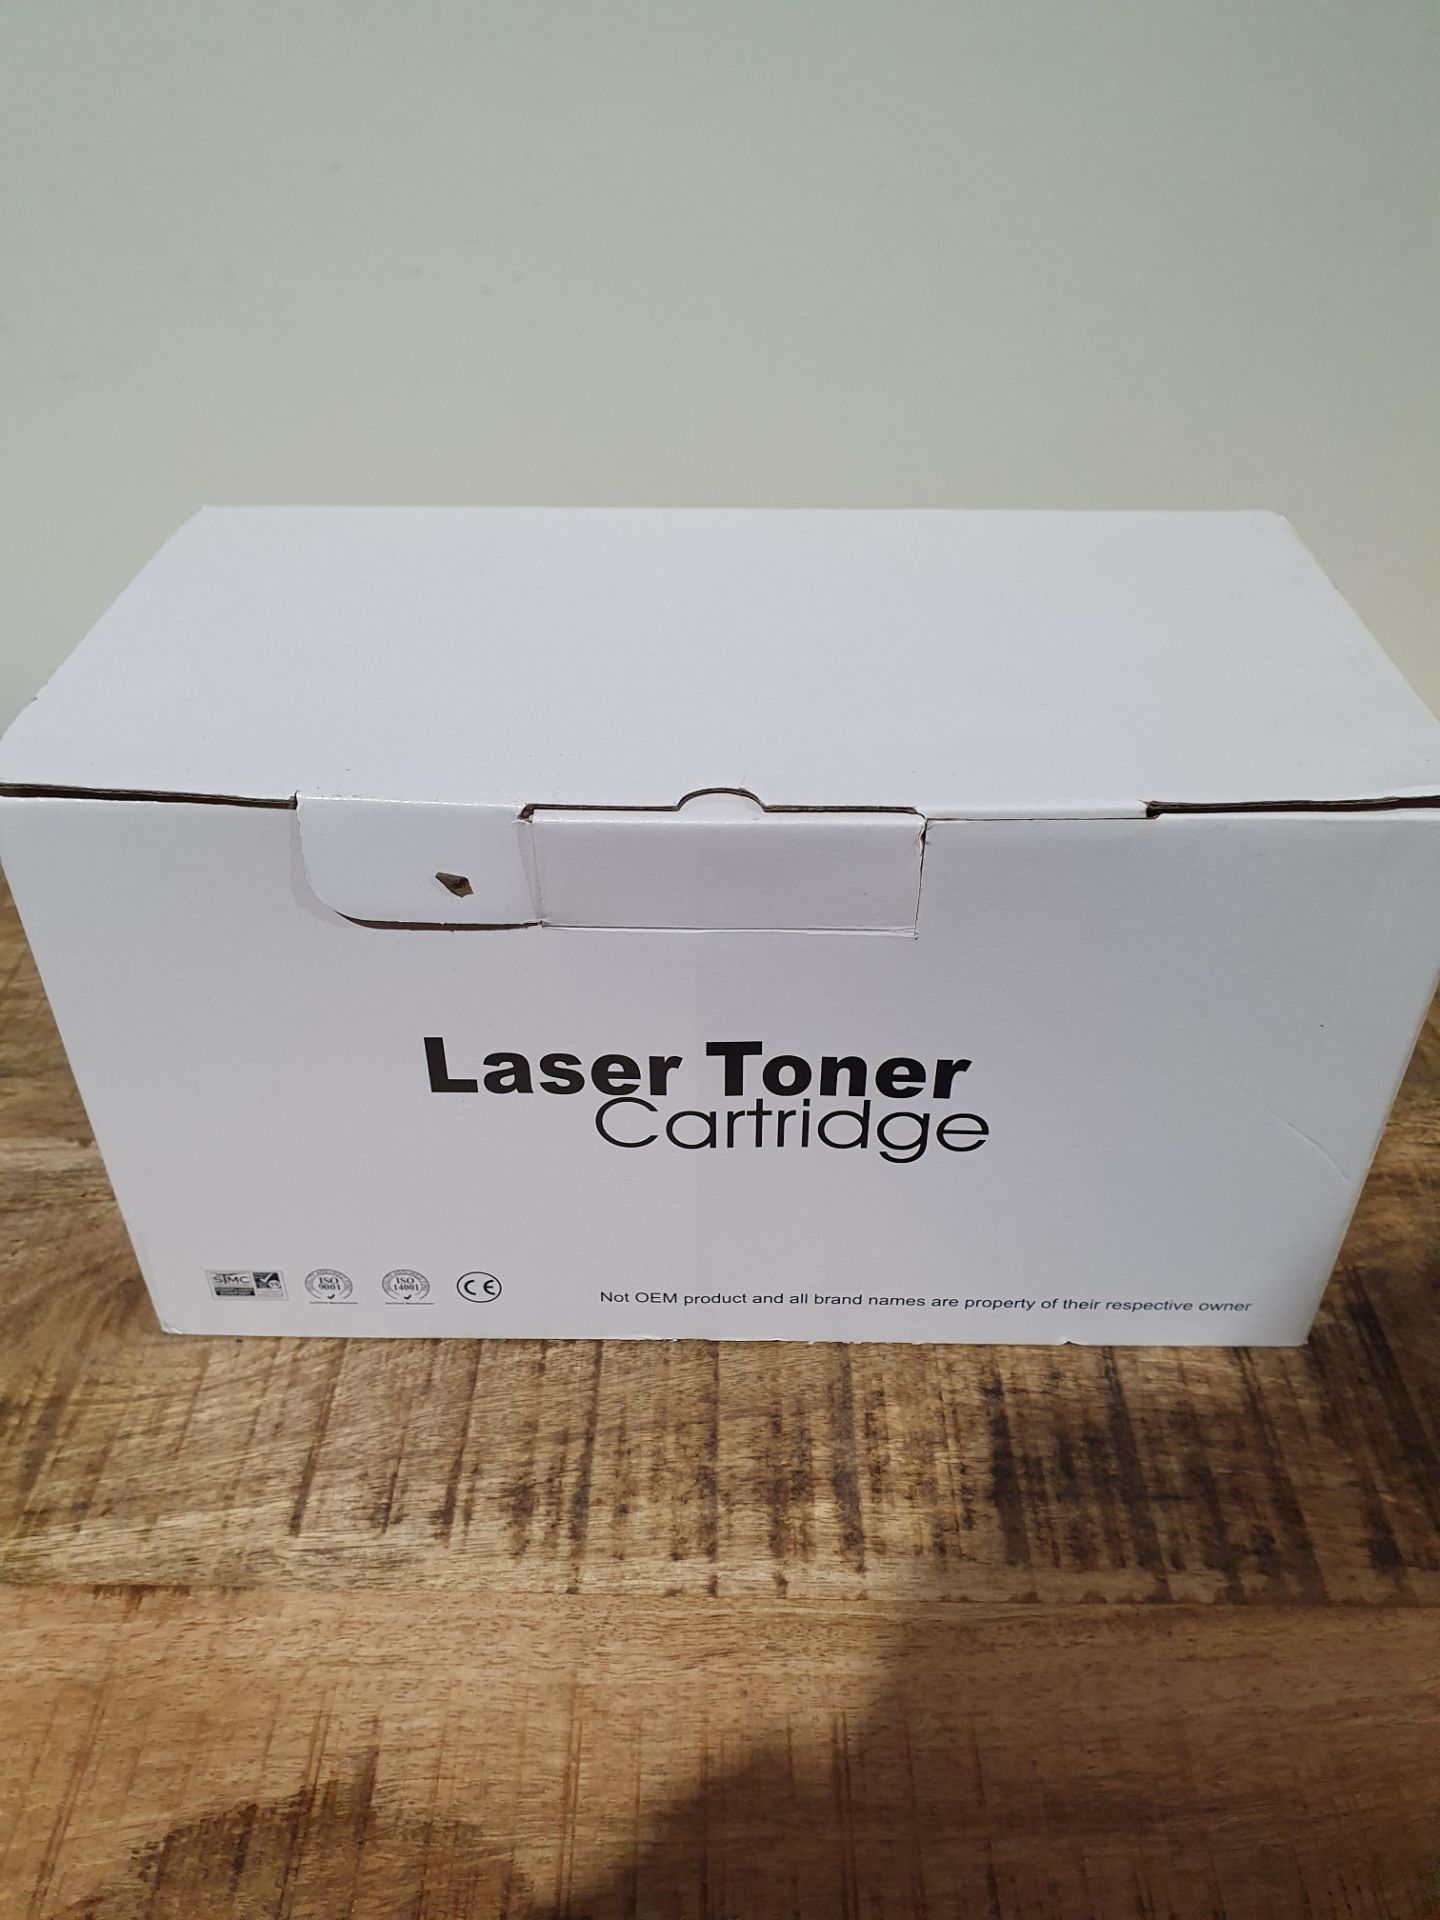 LASER TONER CARTRIDGE Condition ReportAppraisal Available on Request - All Items are Unchecked/